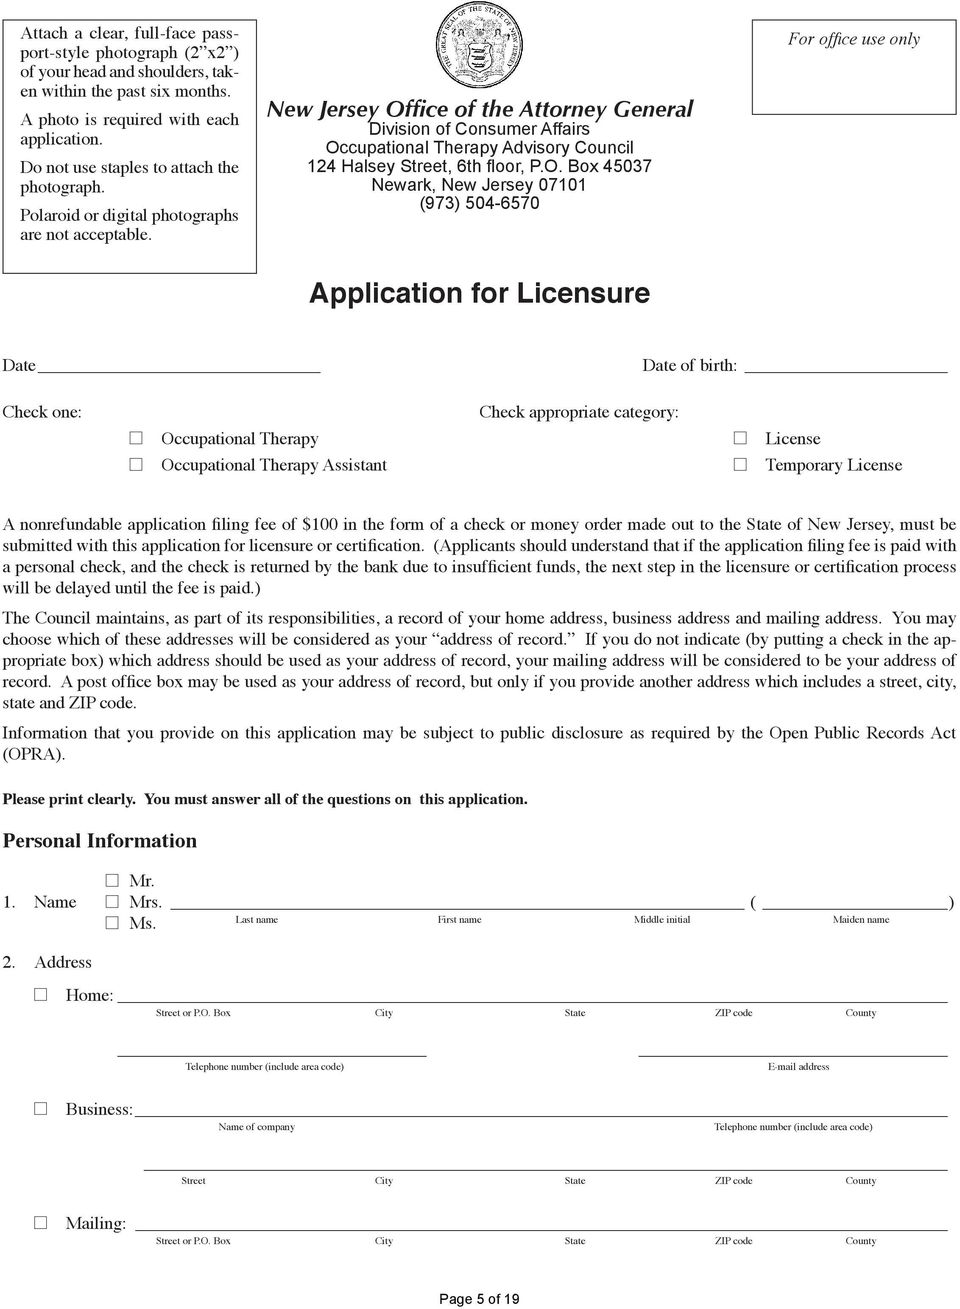 O. Box 45037 Newark, New Jersey 07101 (973) 504-6570 Application for Licensure For office use only Date Date of birth: Check one: _ Check appropriate category: Occupational Therapy _ License